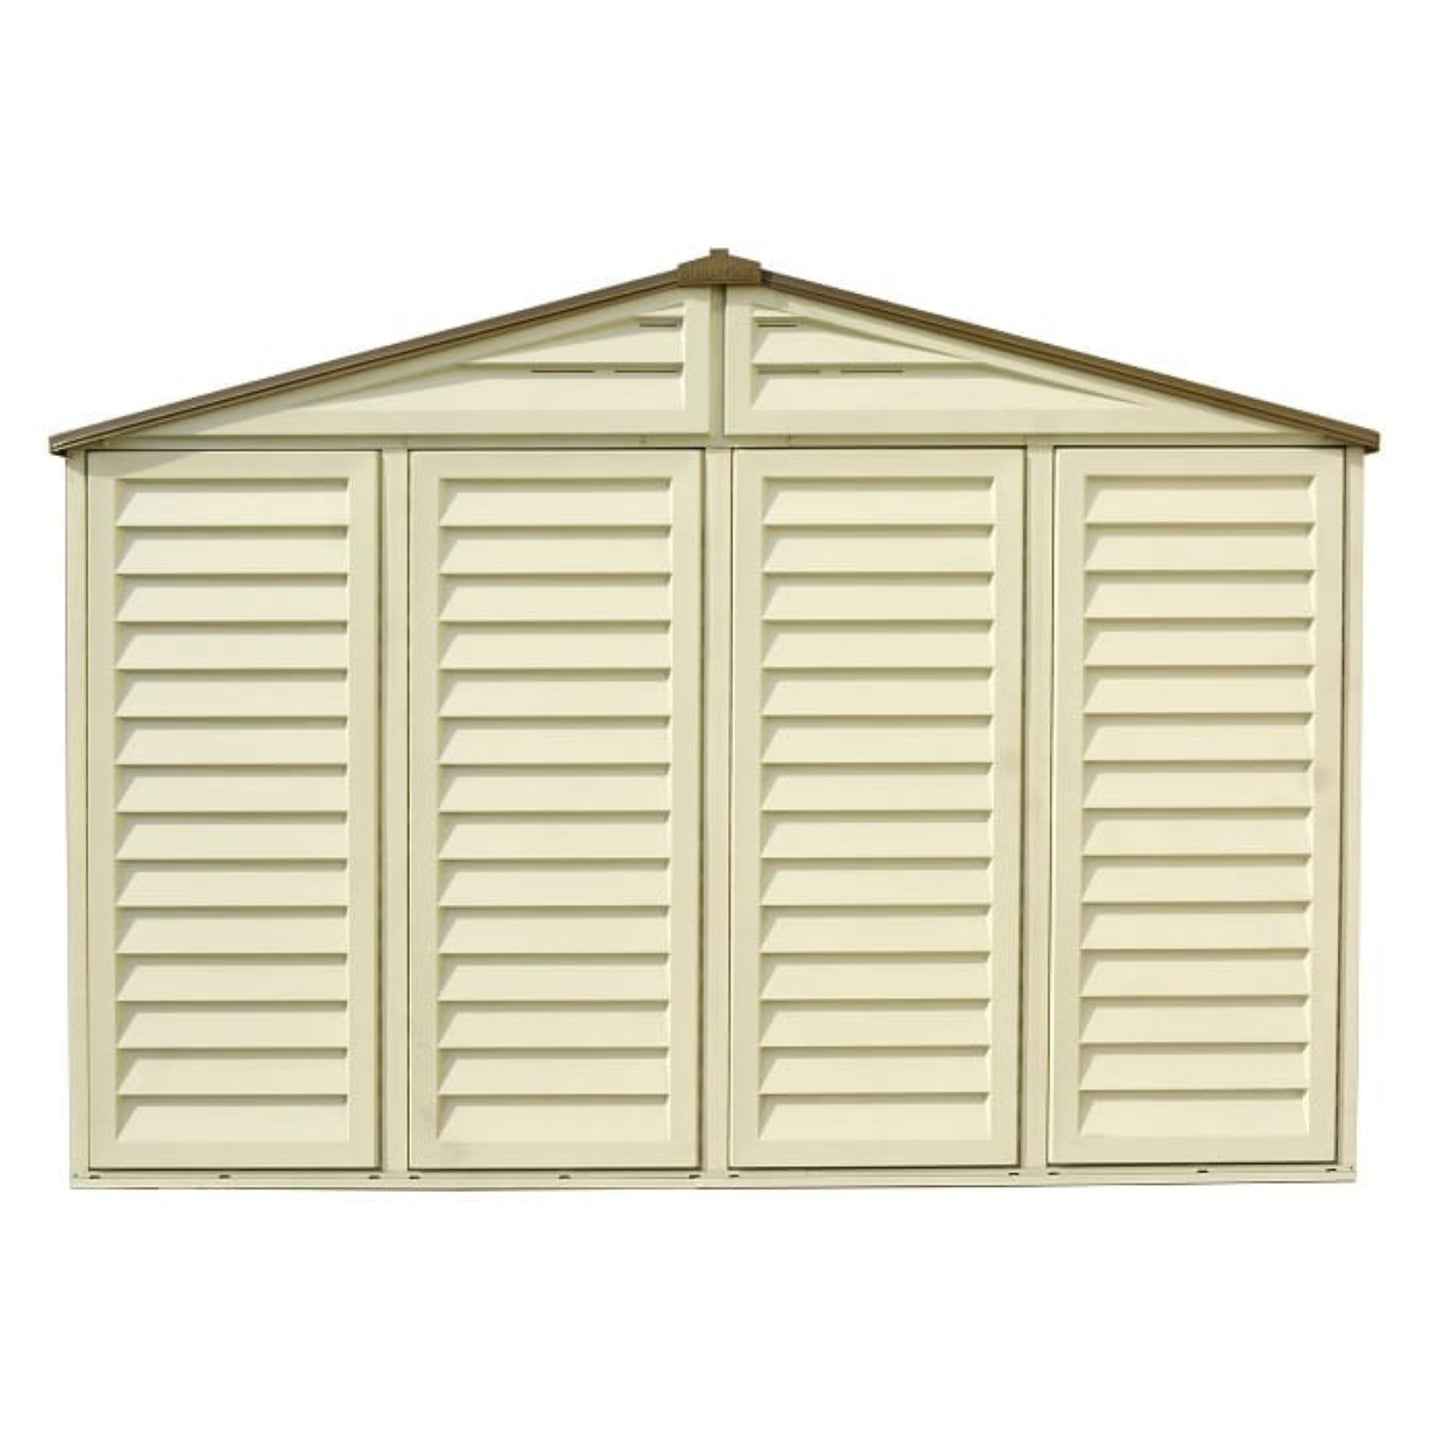 DuraMax 10.5×10 ft Vinyl Shed With Foundation